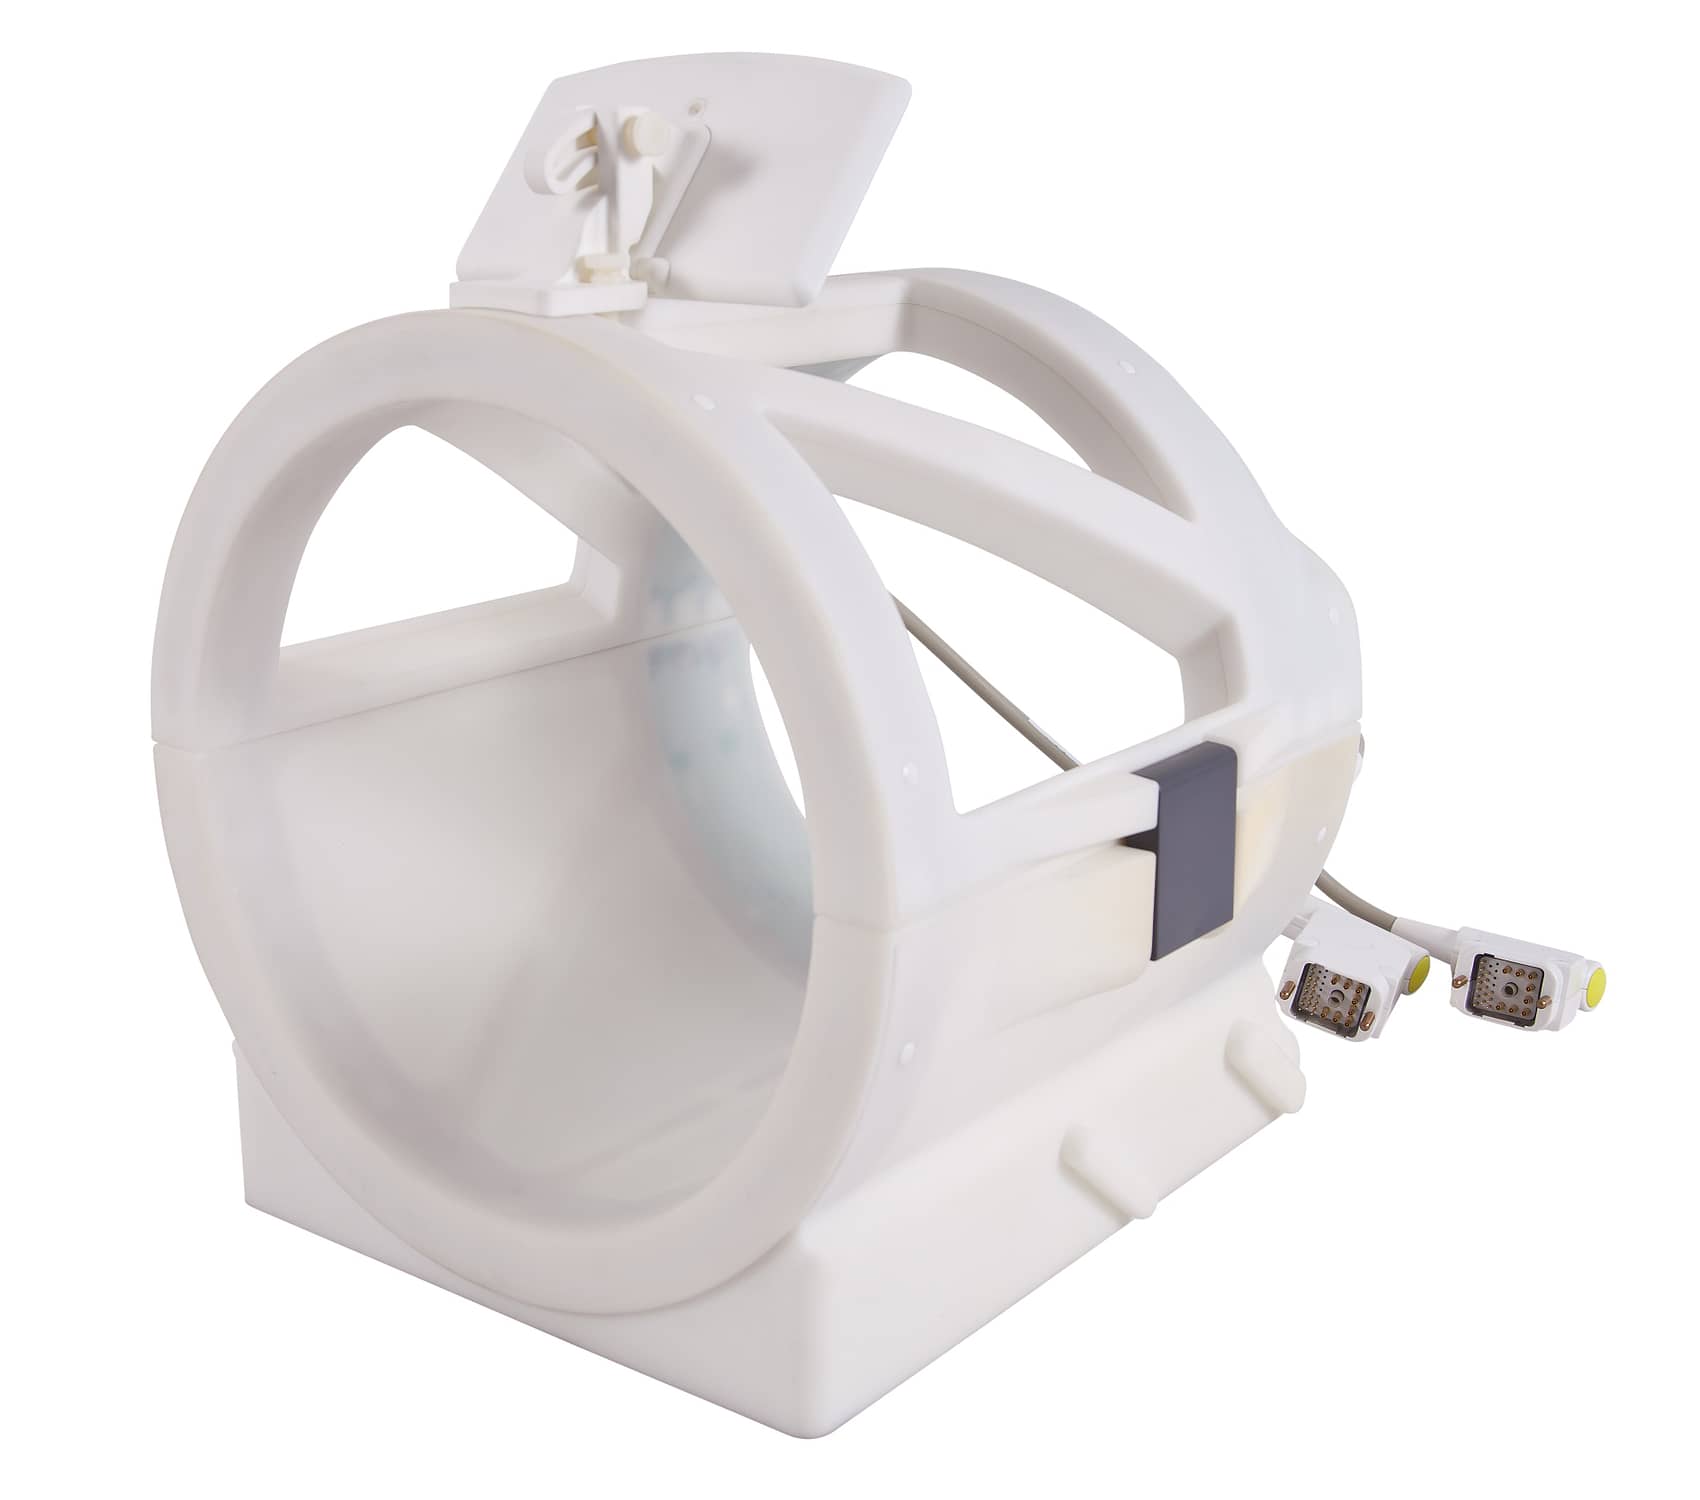 Head RF coil for TMS and/or fMRI applications